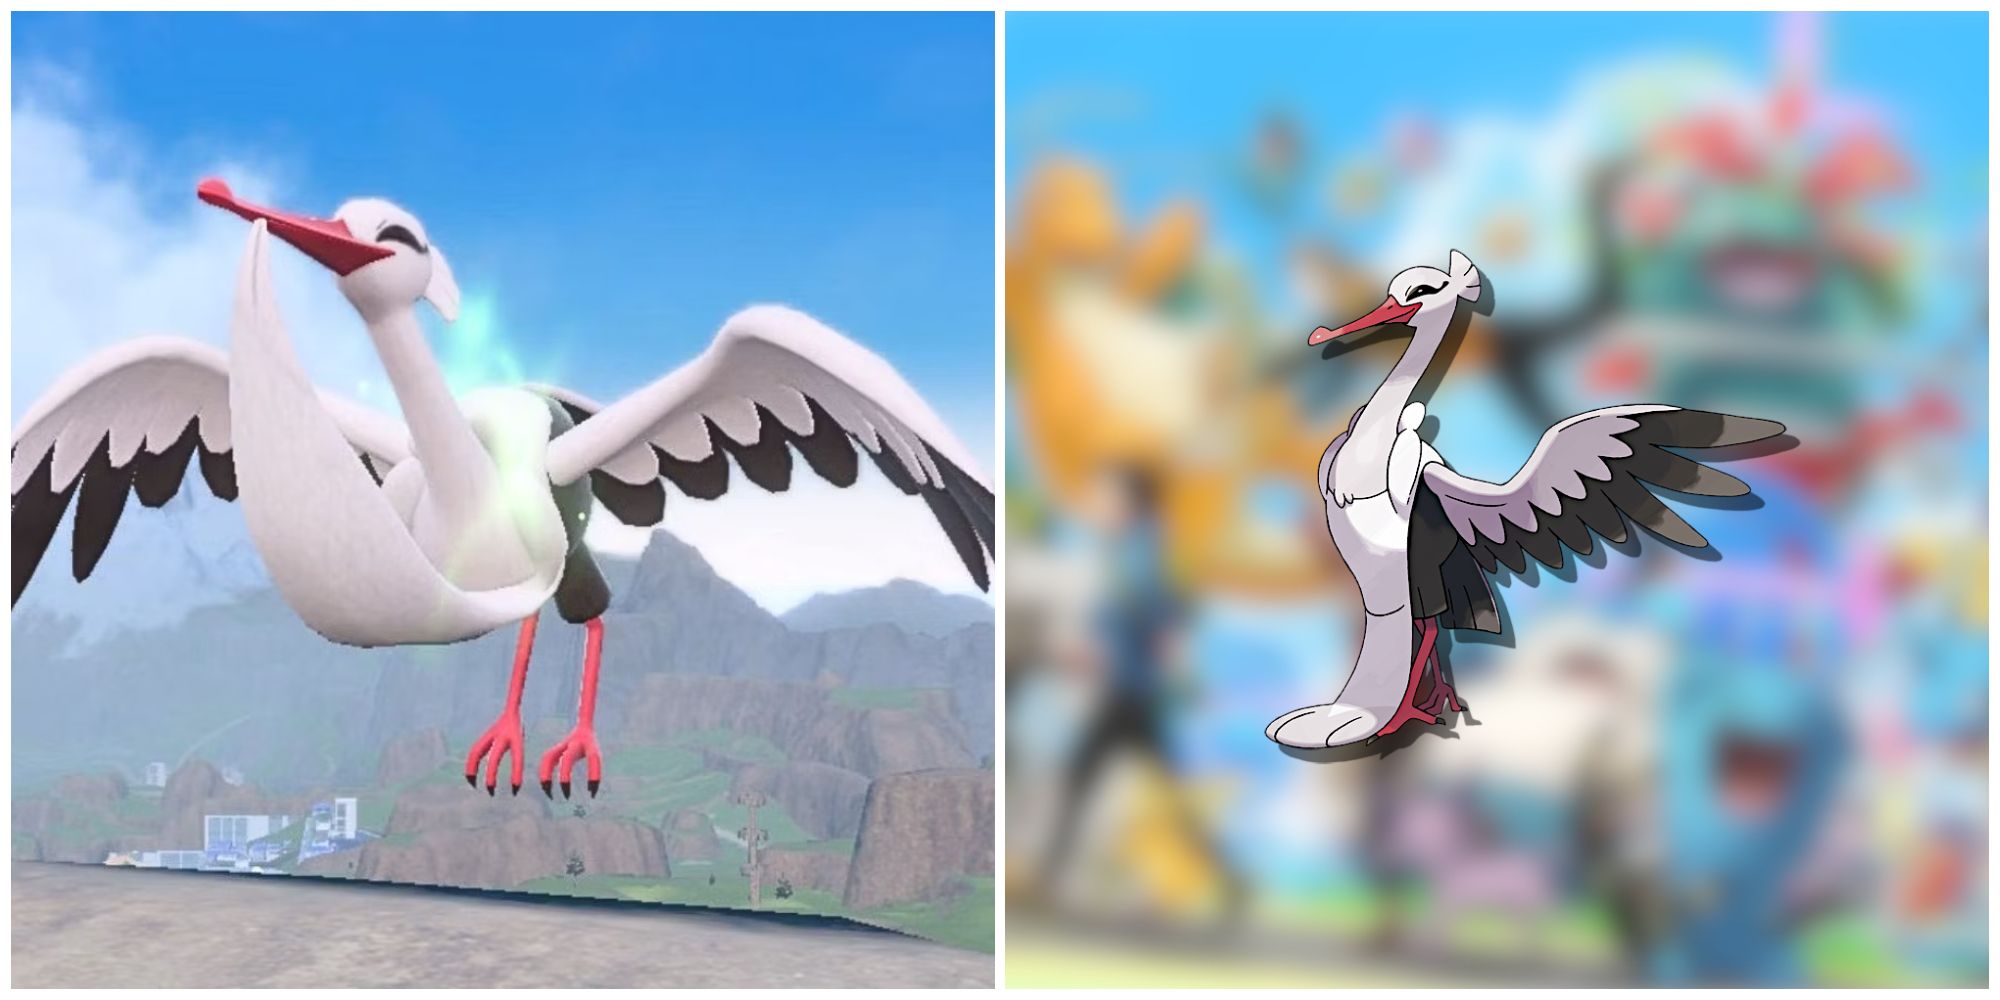 Split image of Bombirdier in-game and Bombirdier in the foreground from Pokemon GO